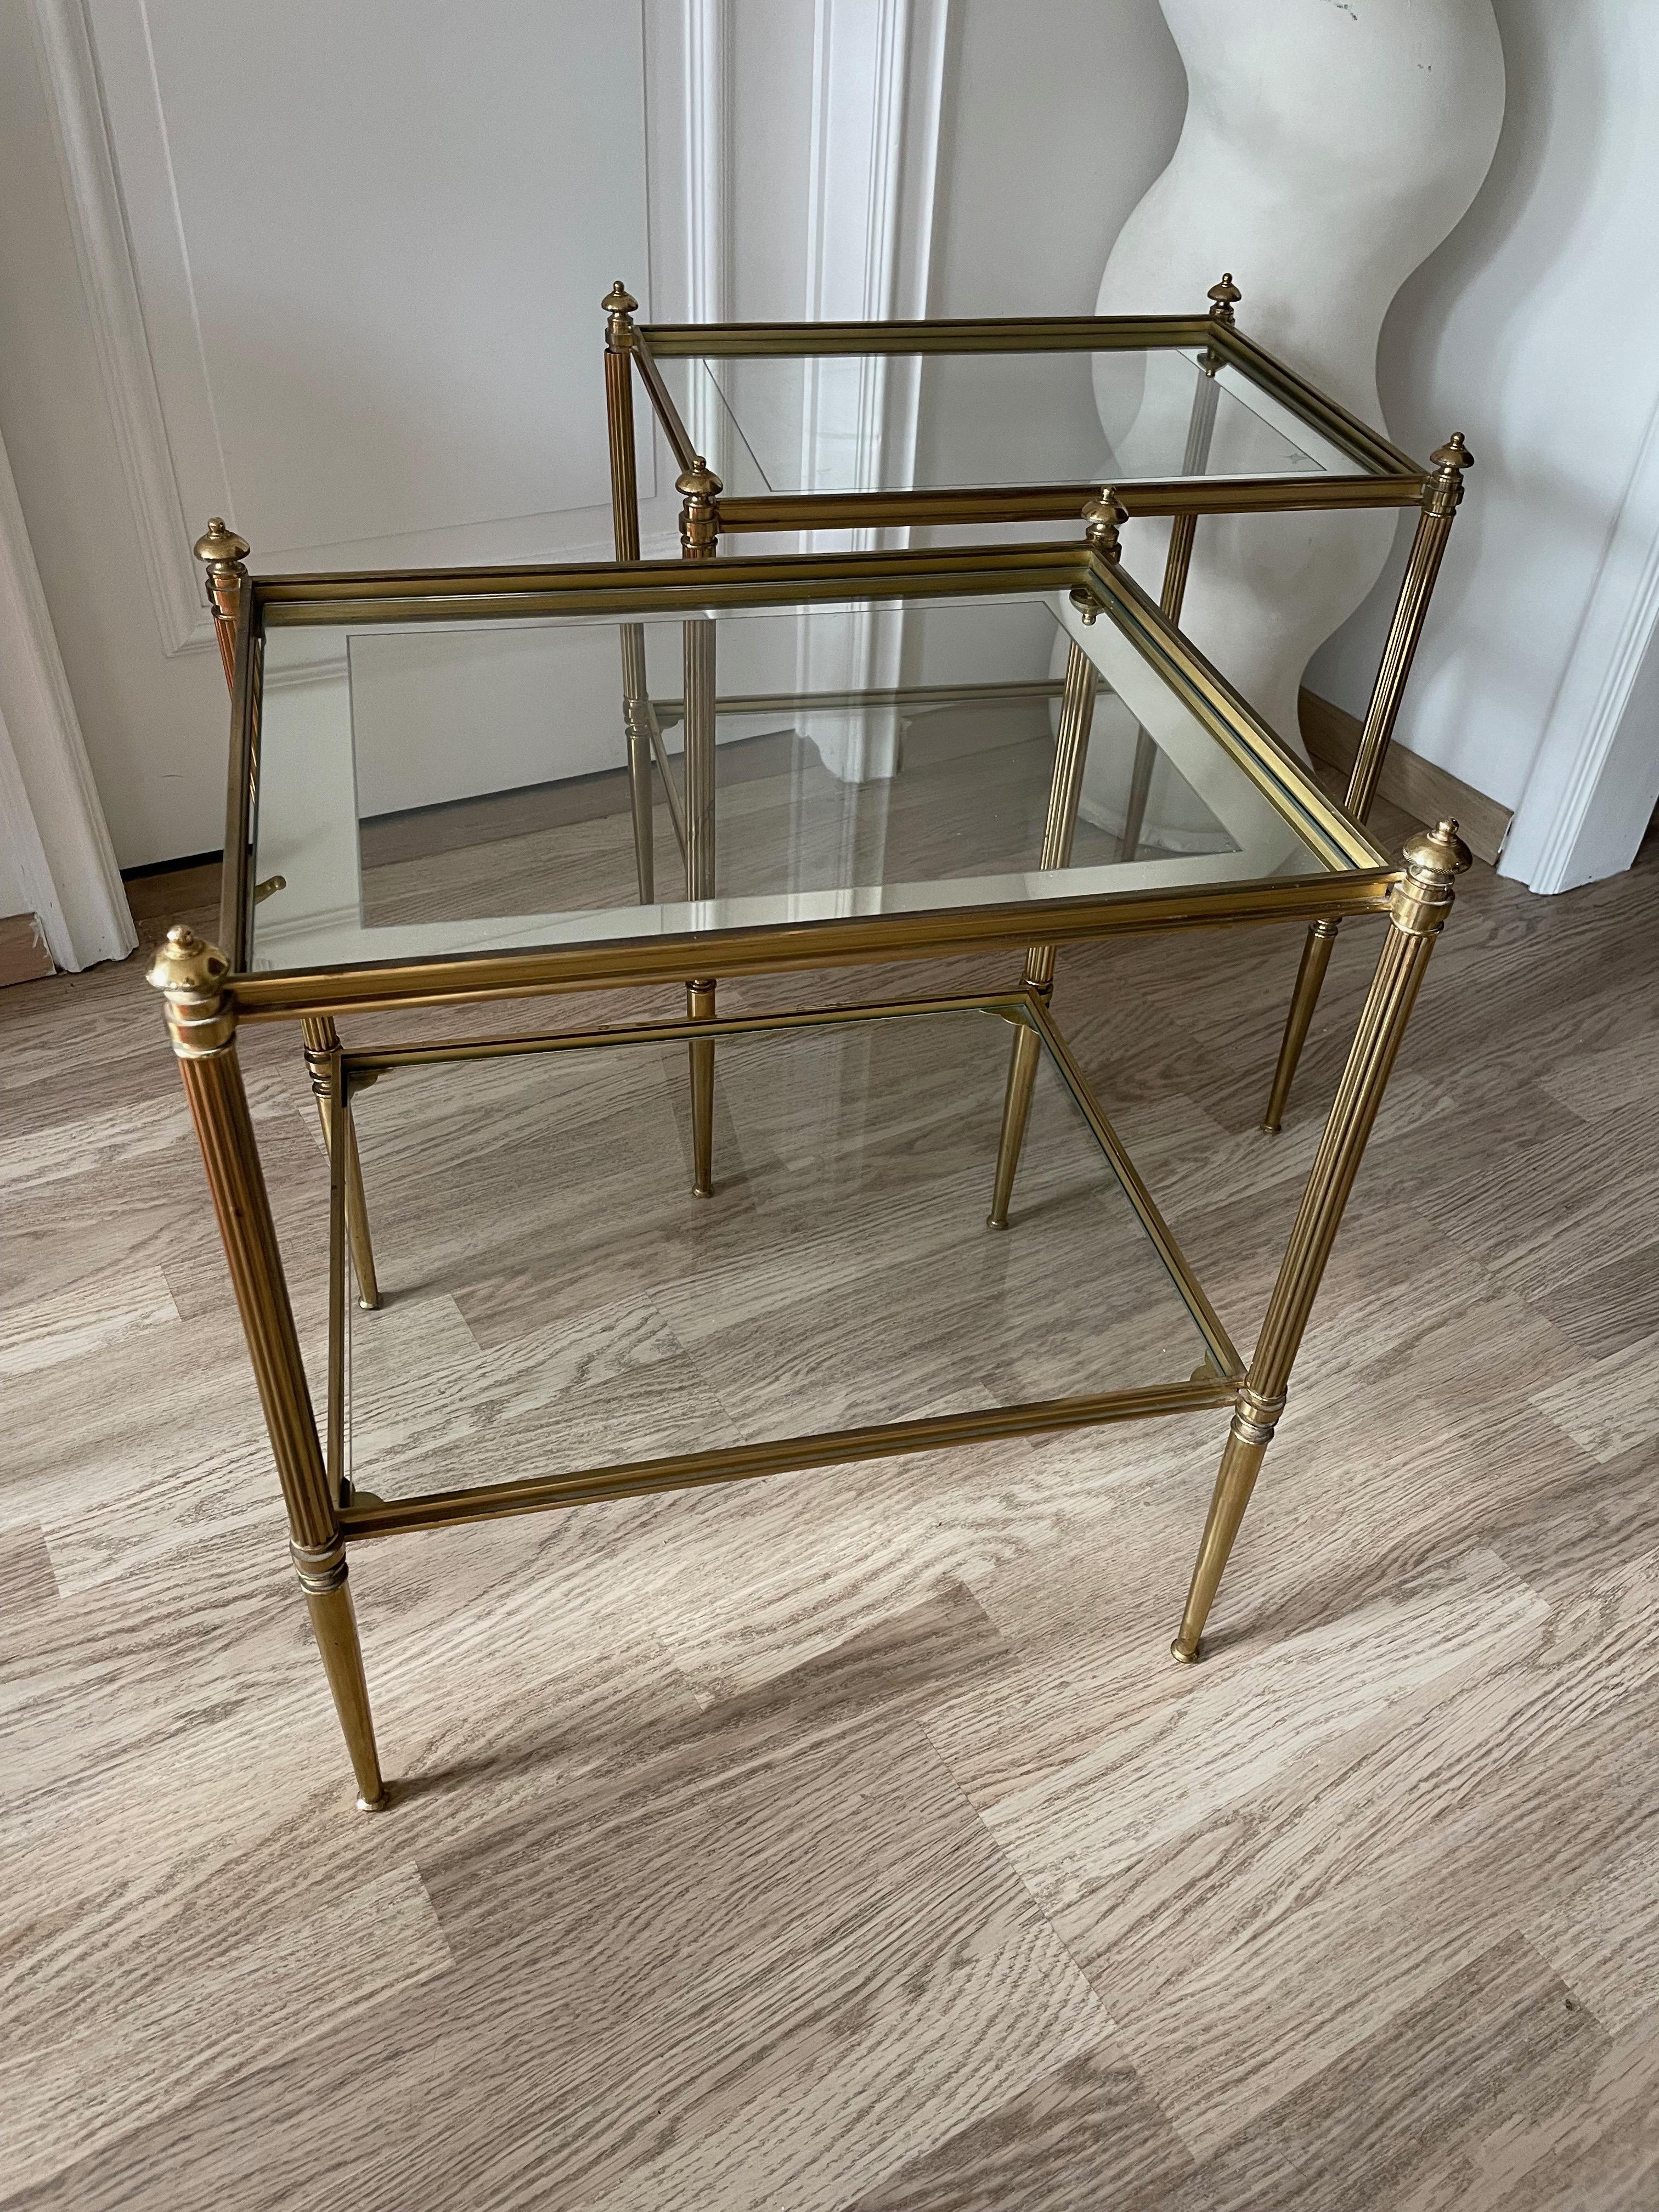 Elegant brass and mirrored glass tops side by side tables.
Neoclassical, two tiers and fine carving.
By maison Charles & Fils- Paris-France.
Circa 1970.
